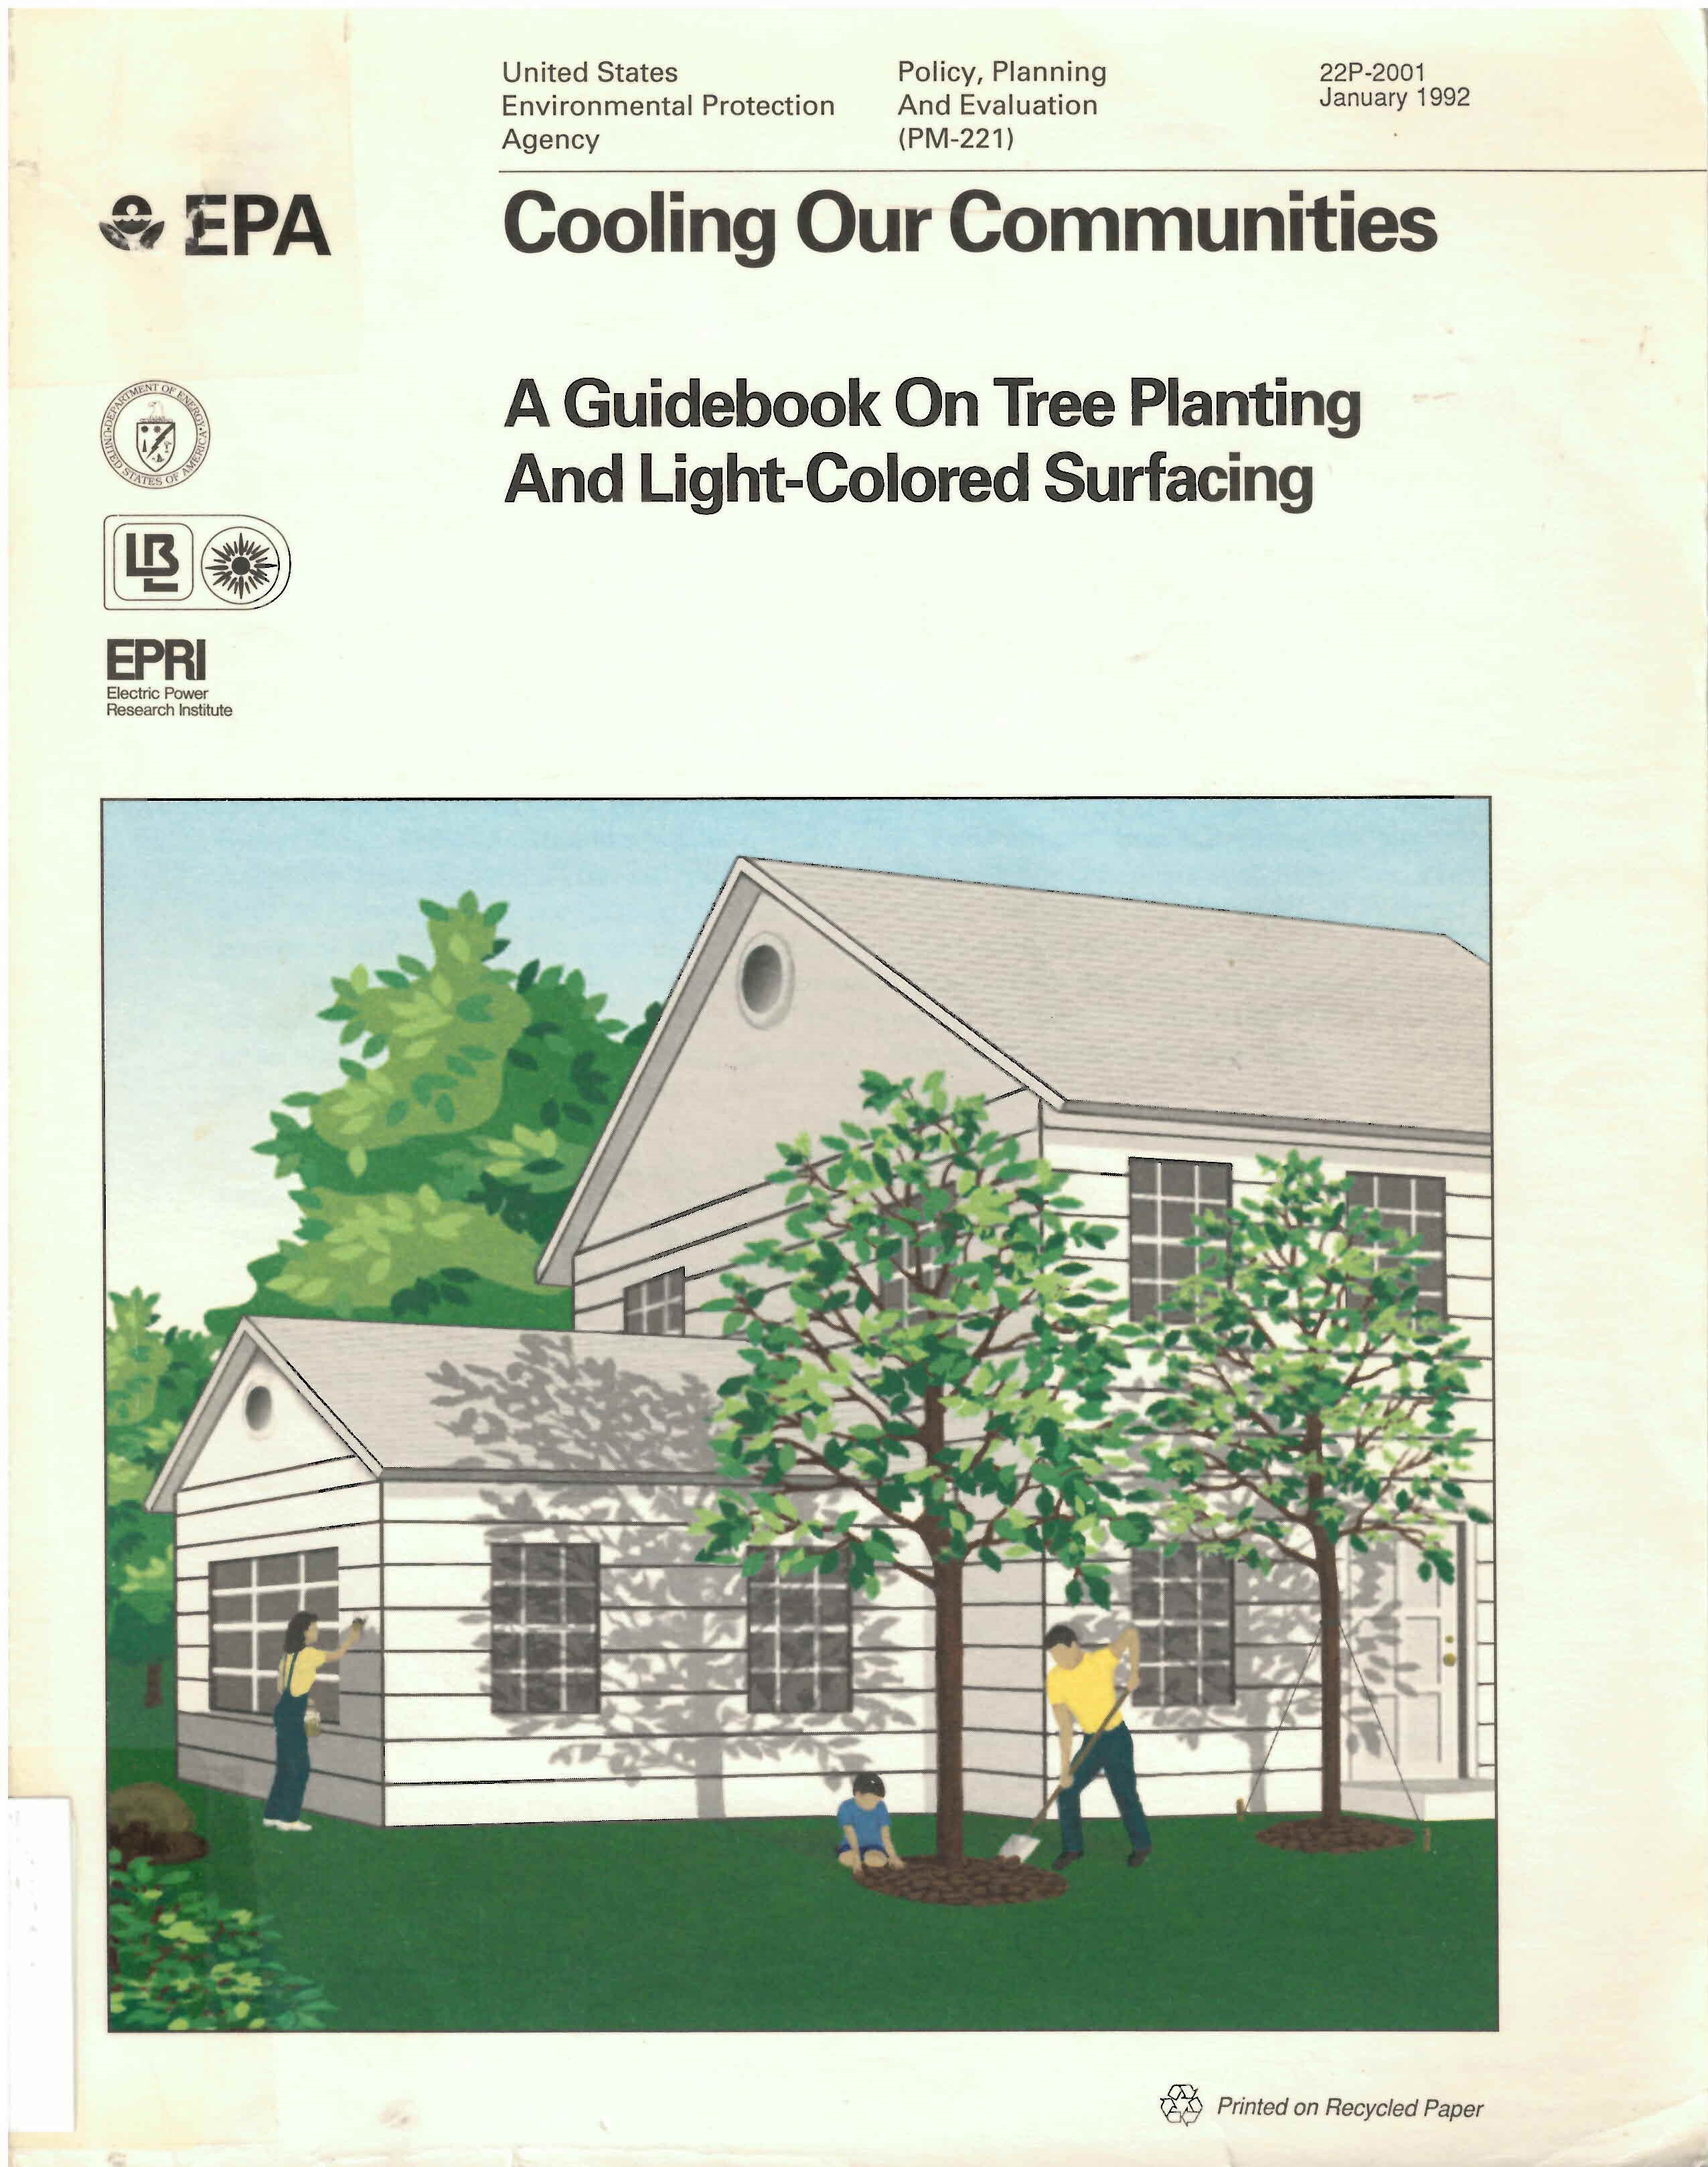 Cooling our communities : a guidebook on tree planting and light-colored surfacing